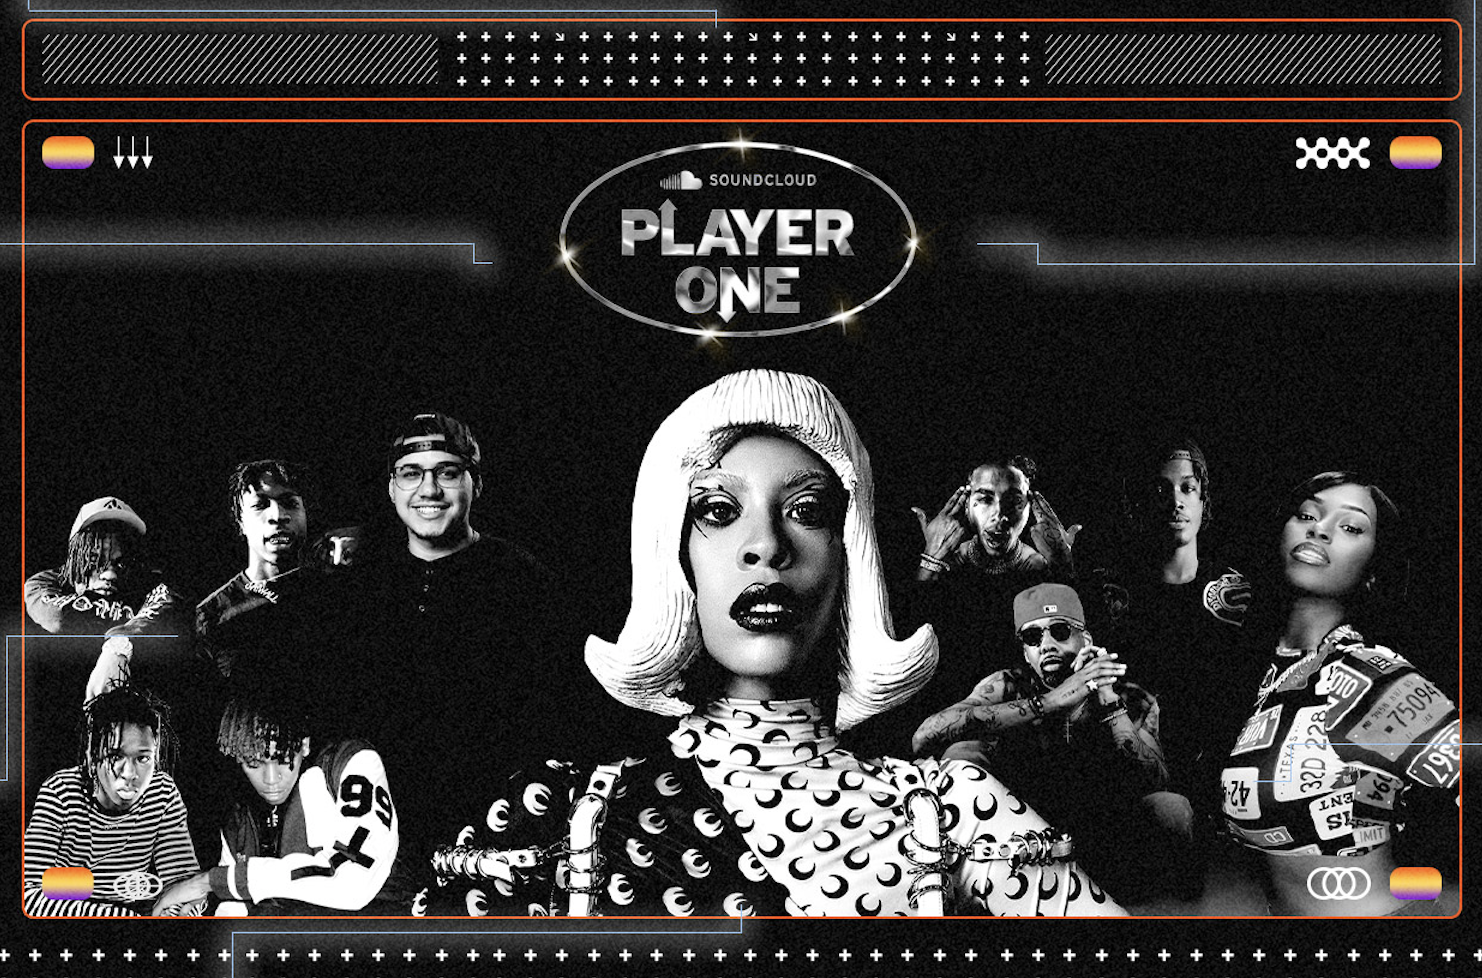 SoundCloud's New Gaming Tournamnet SoundCloud Player One Goes Down Feb.18